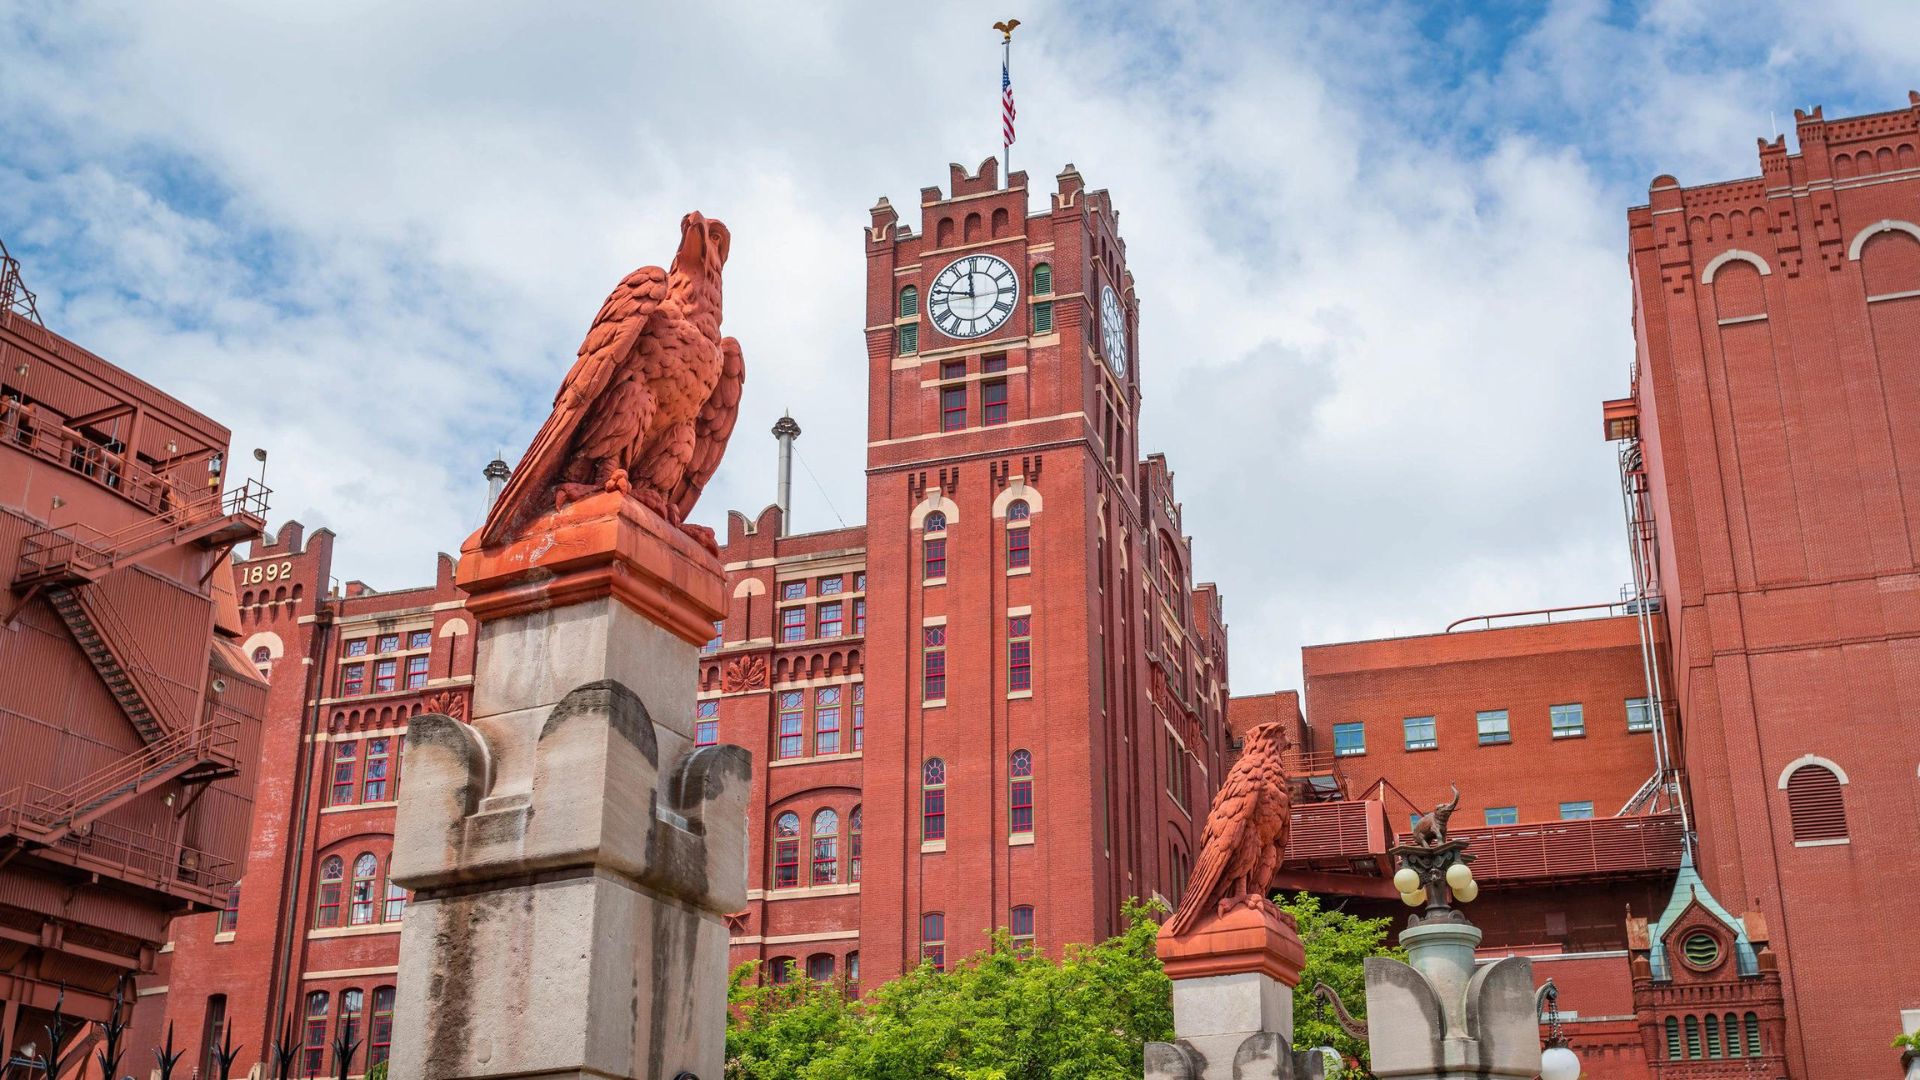 The Anheuser-Busch brewery in St. Louis exemplifies German Romanesque architecture.